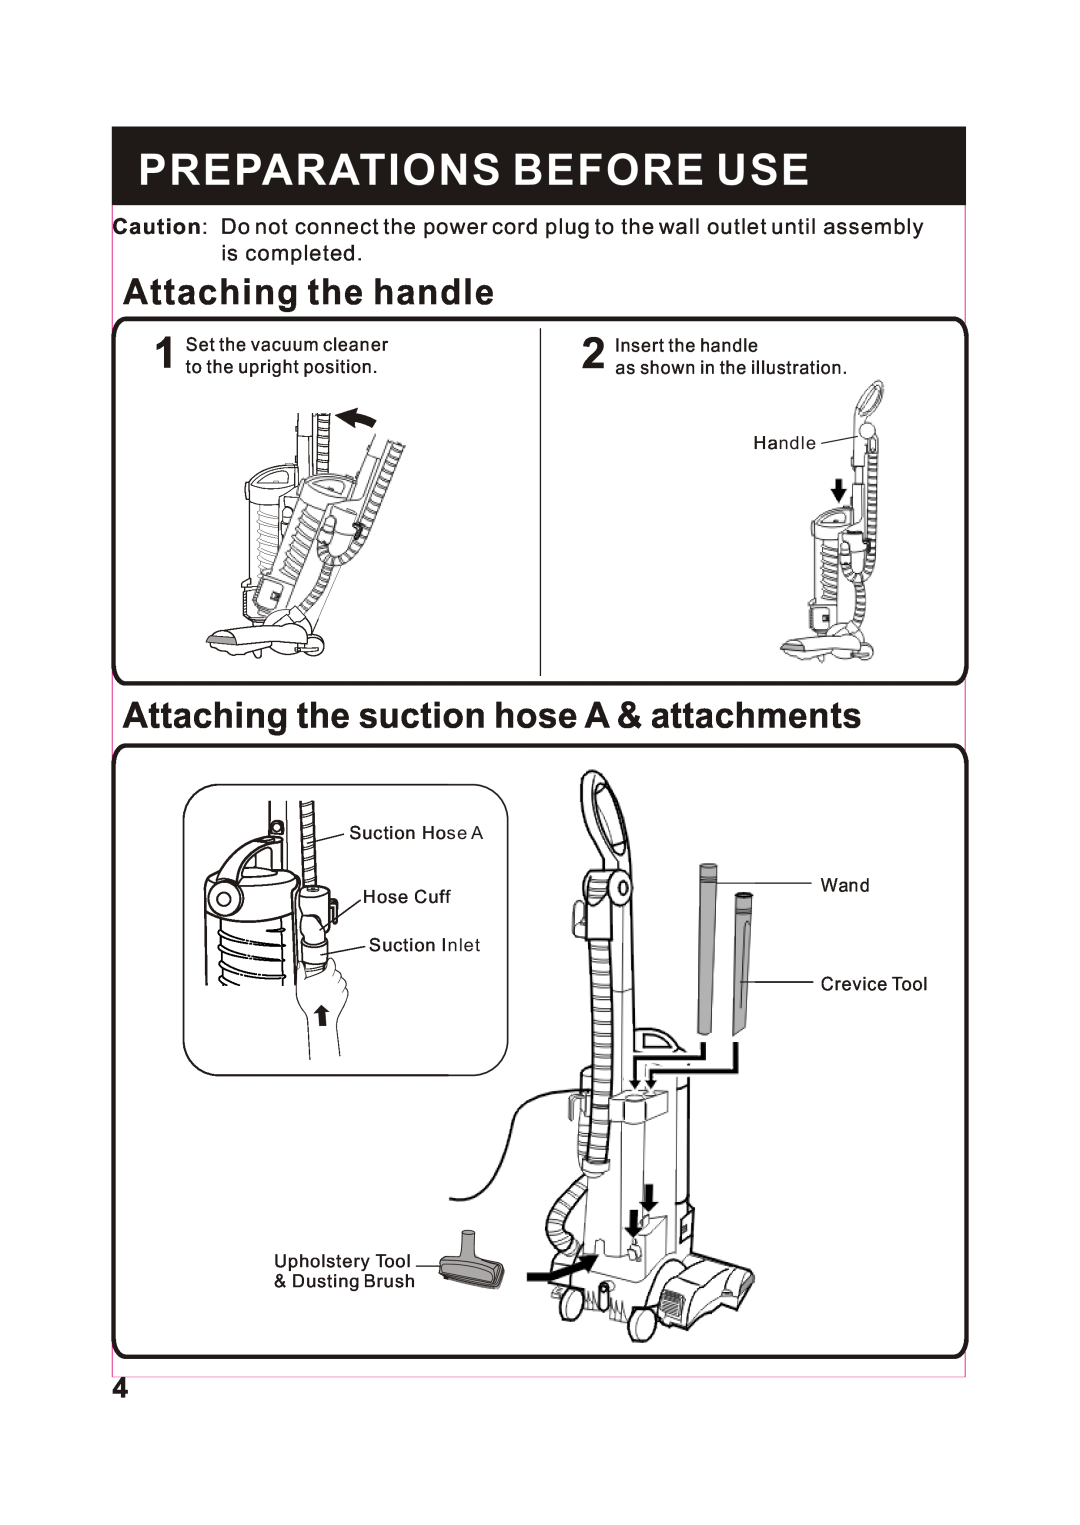 Fantom Vacuum FM743 Preparations Before Use, Attaching the handle, Attaching the suction hose A & attachments 